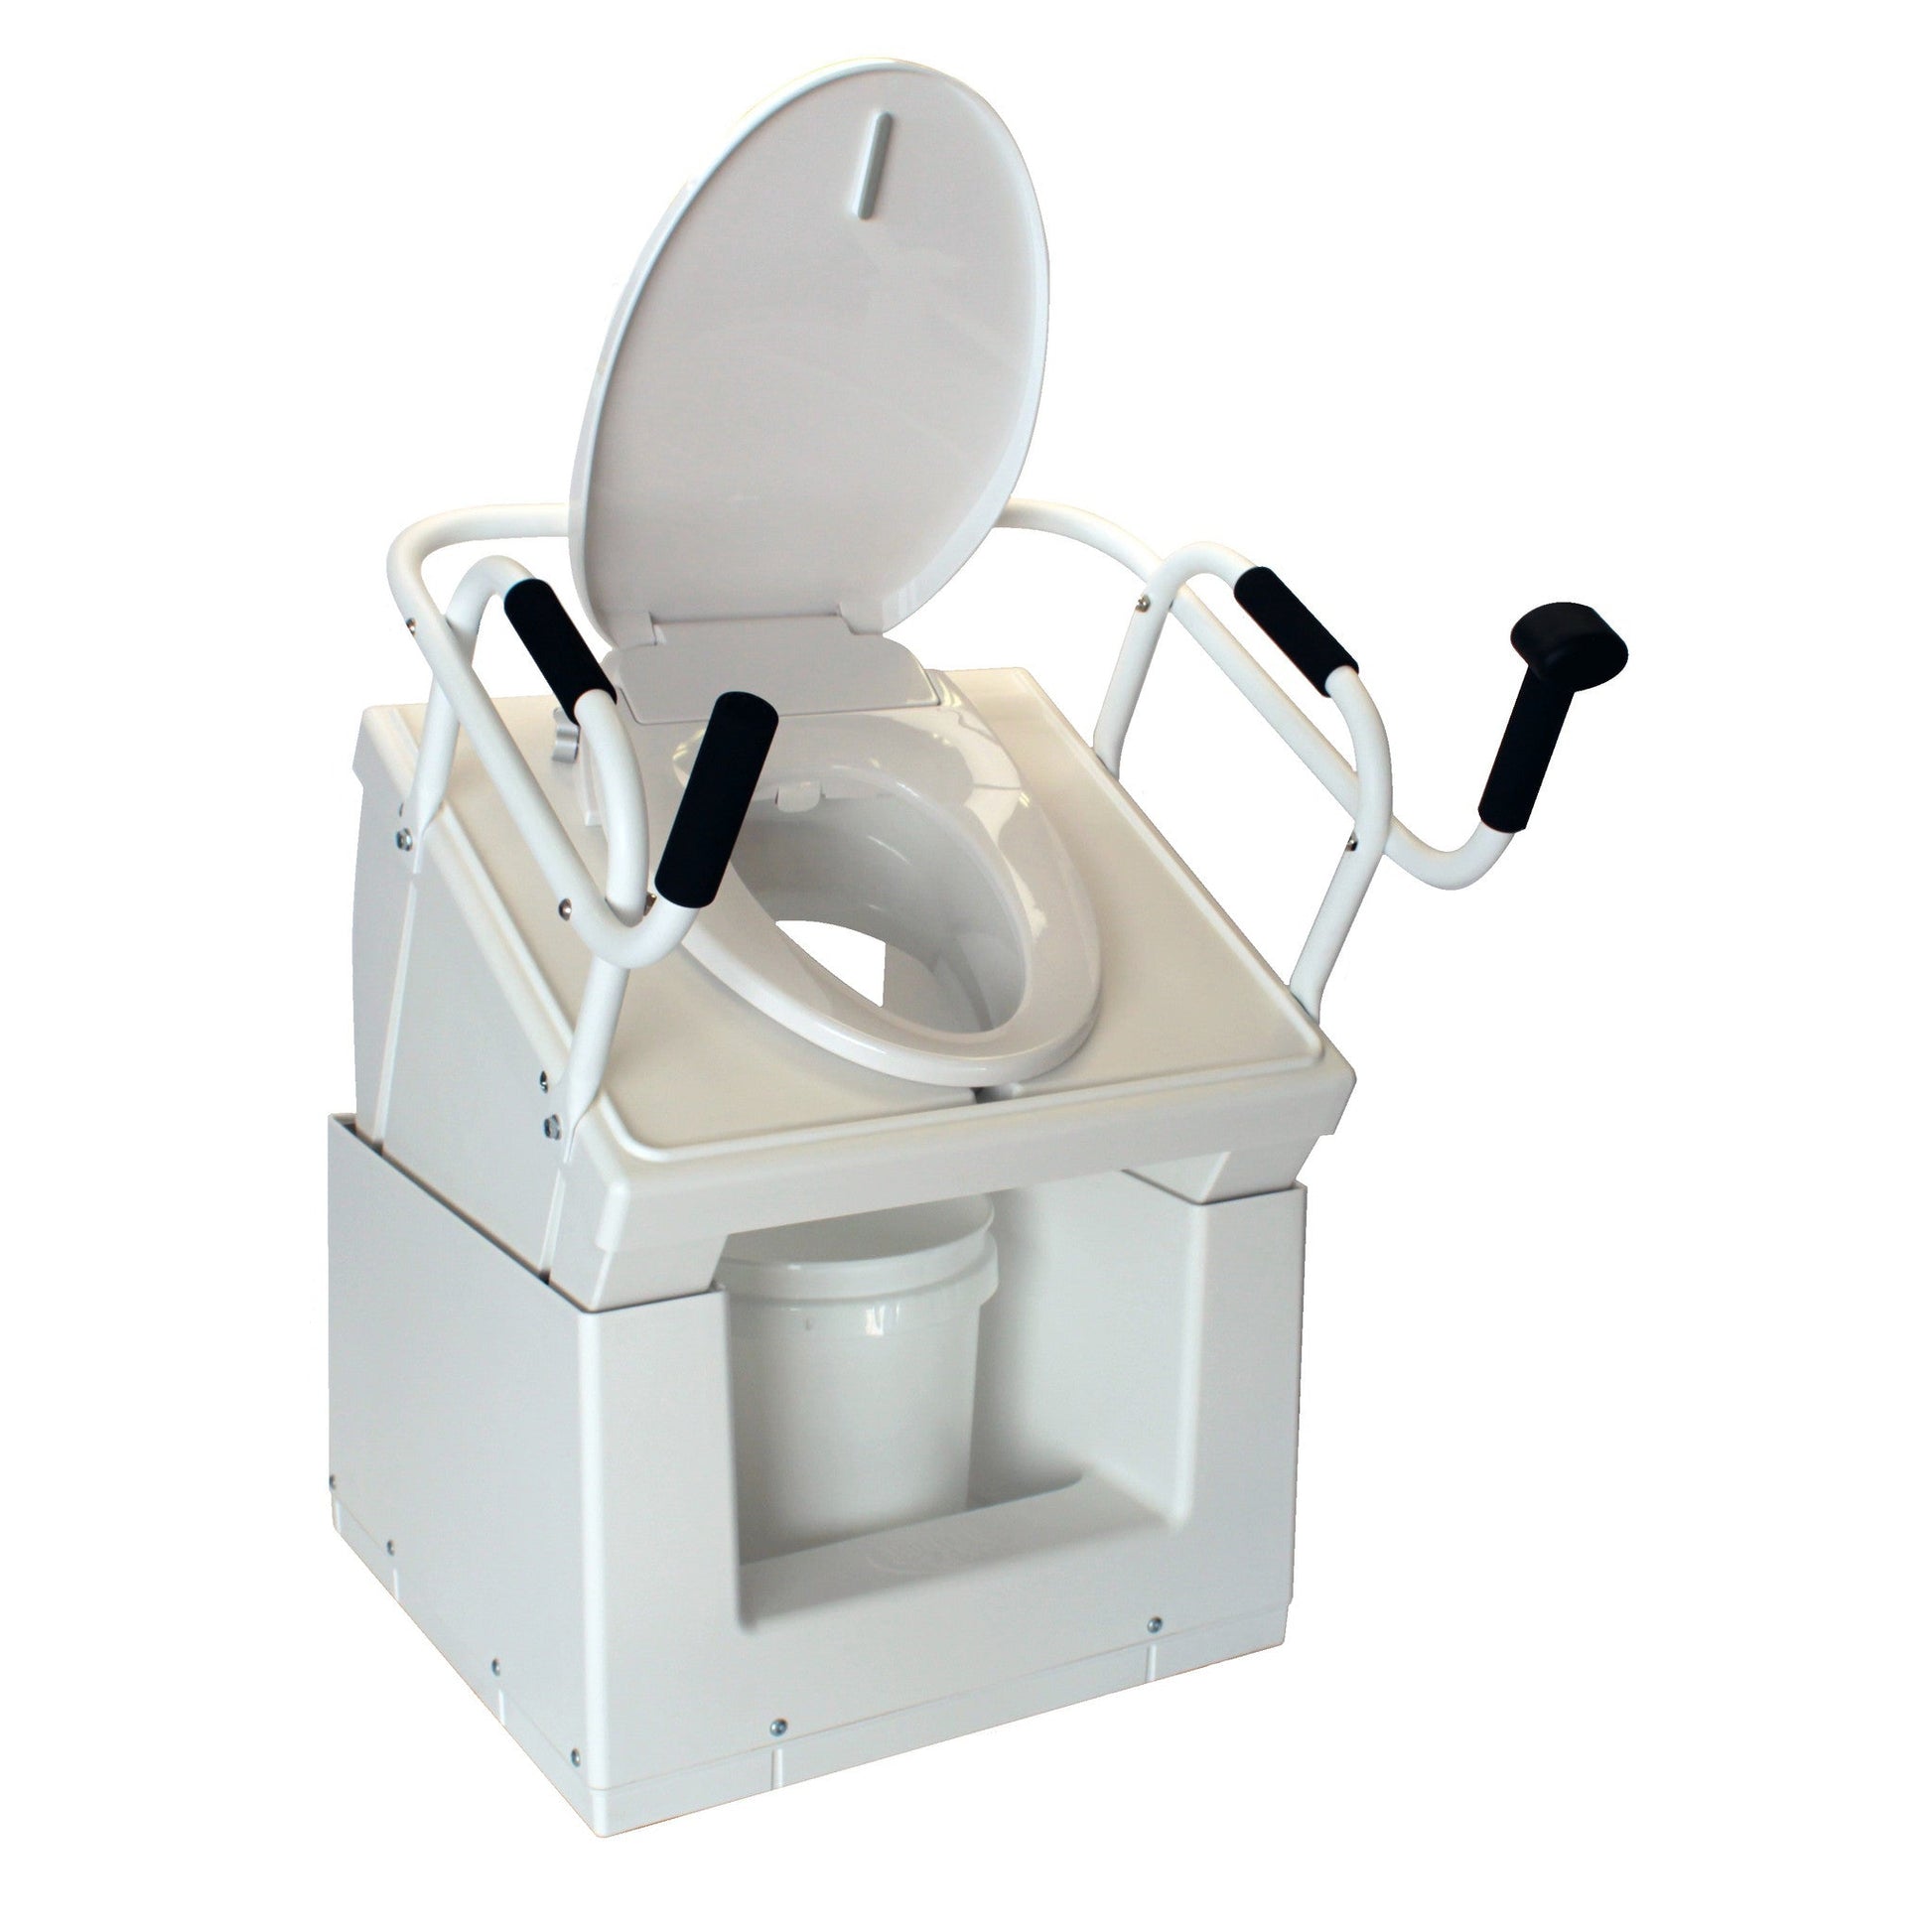 Throne Buttler 37" Powered Bedside Toilet Lift With 28" Wide Handle Bar, Upgraded Soft Close Toilet Seat and Commode Conversion Kit